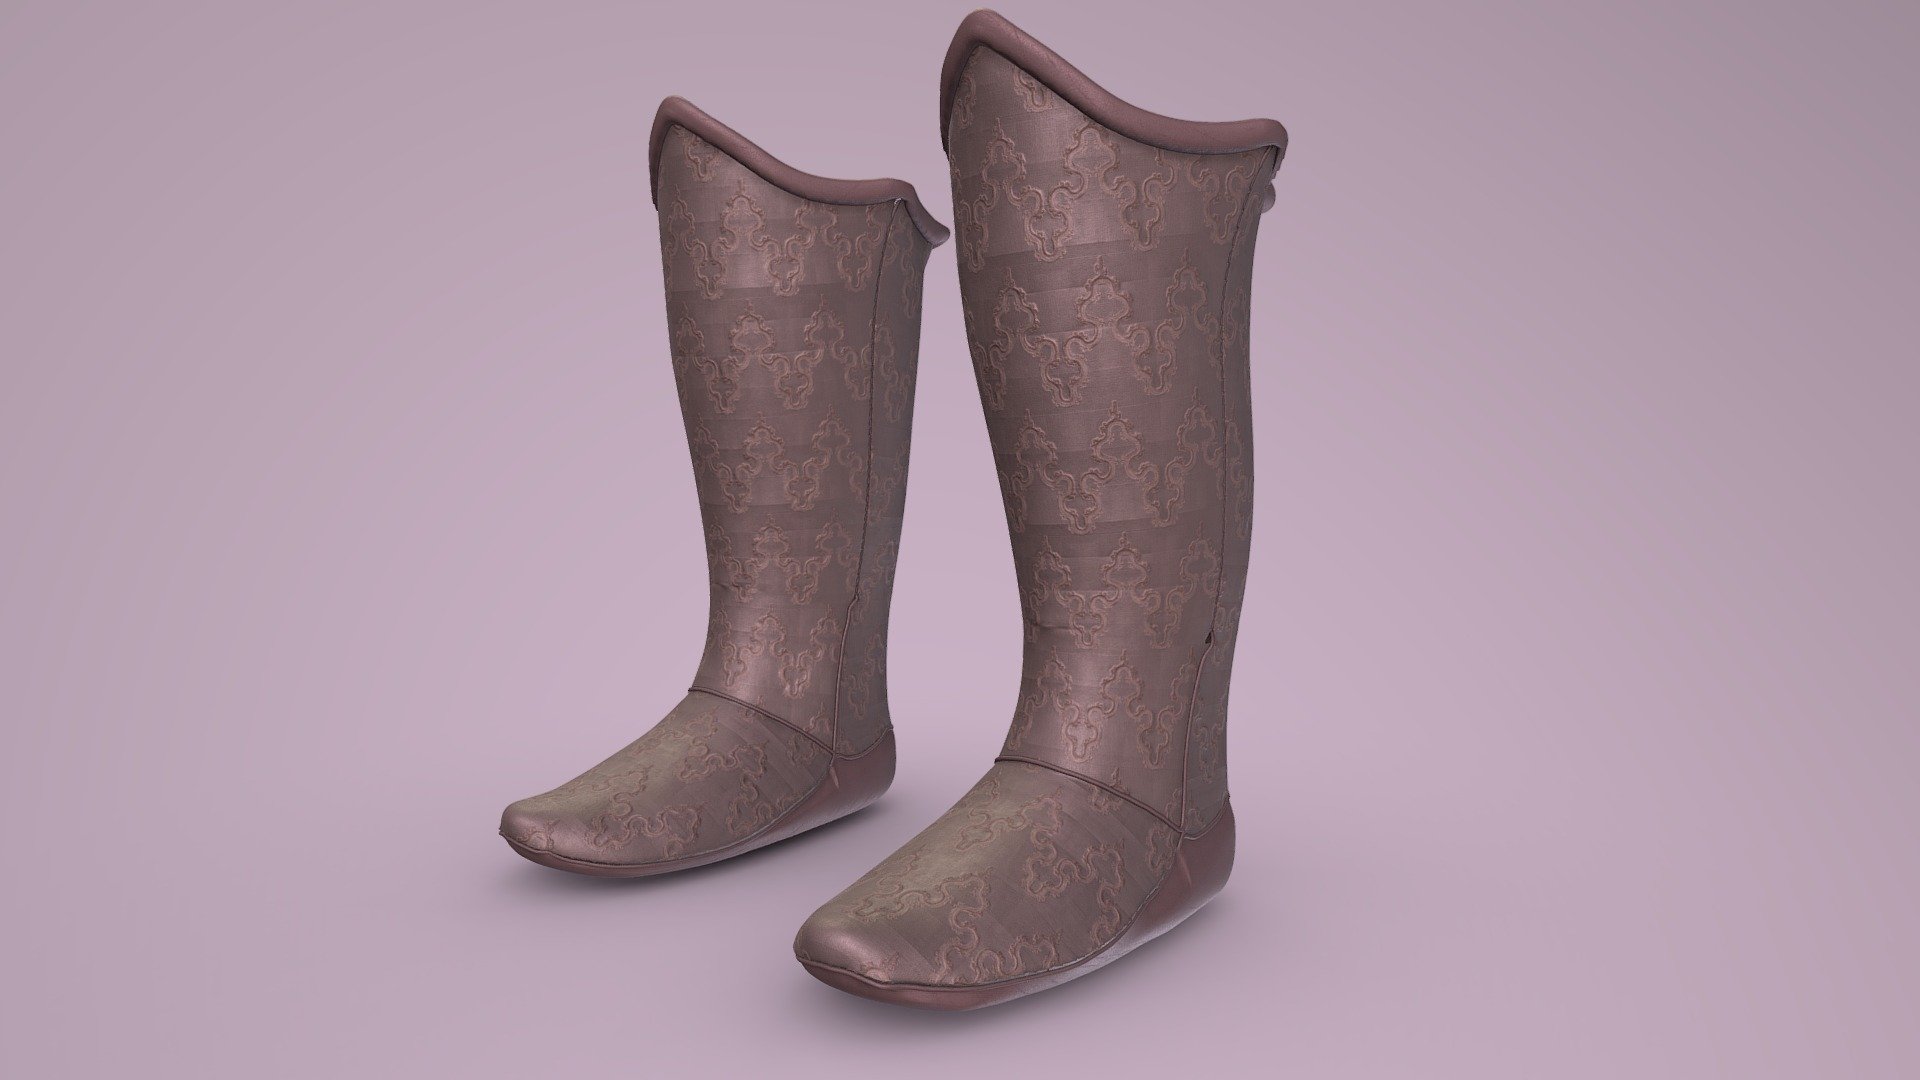 Xuŋa (Xiongnu) Boots

Reconstructed Xuŋa (Xiongnu) boots based on findings from the Noin-Ula burial site in Mongolia. 

Link to Original Object

Learn more at BilgeBitig.org, home of Turkology! - Xuŋa (Xiongnu) Boots - 3D model by BilgeBitig 3d model